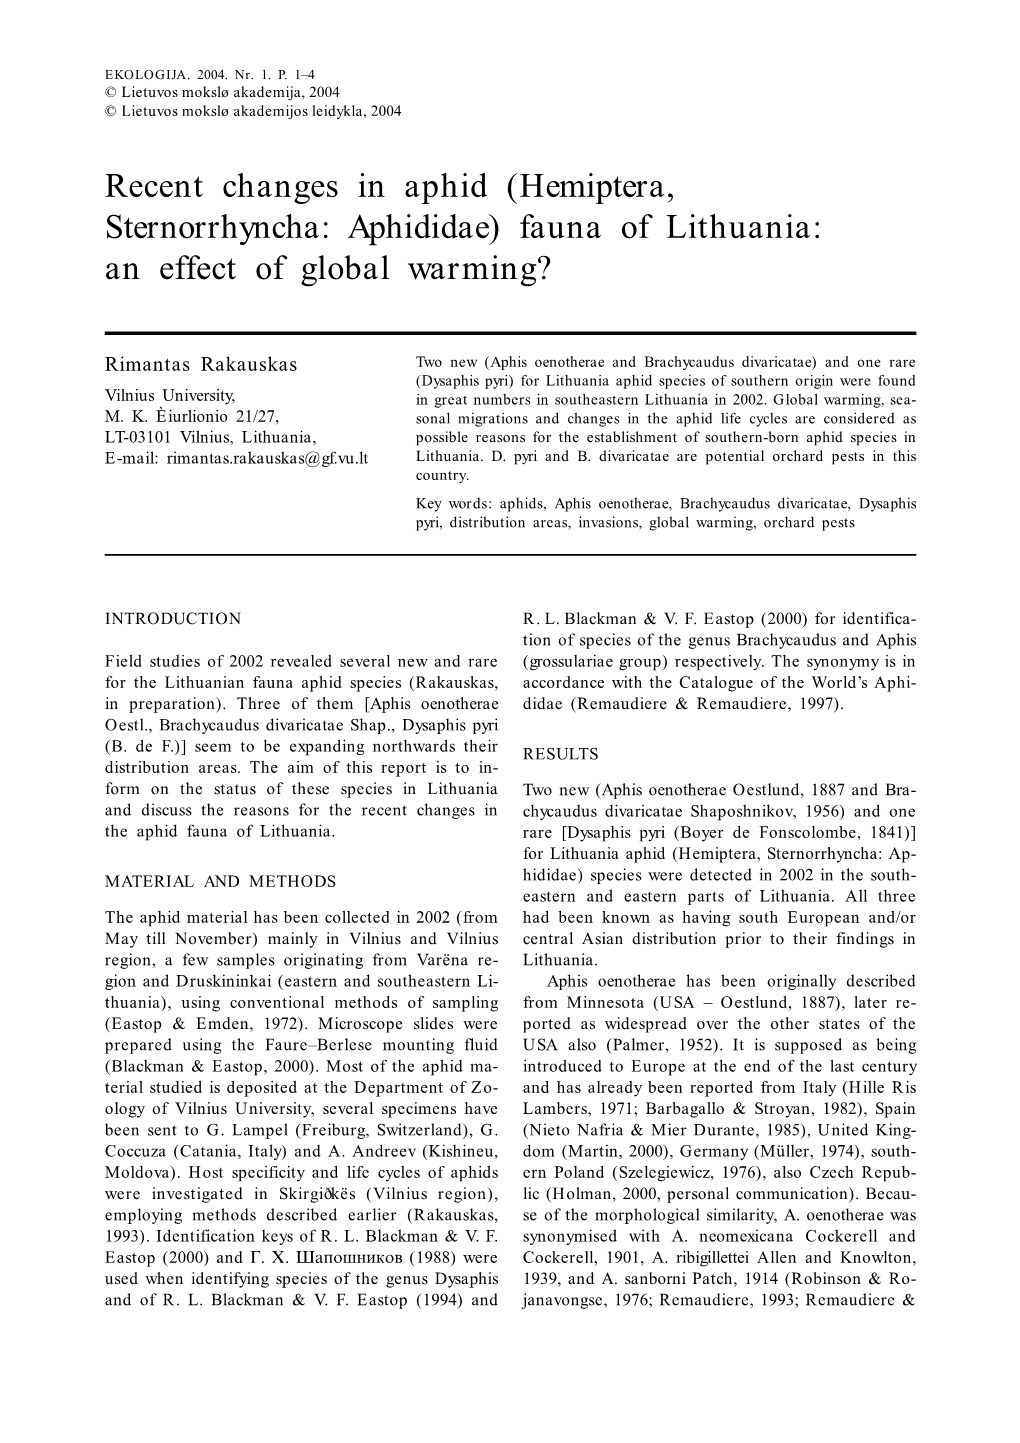 Recent Changes in Aphid (Hemiptera, Sternorrhyncha: Aphididae) Fauna of Lithuania: an Effect of Global Warming?